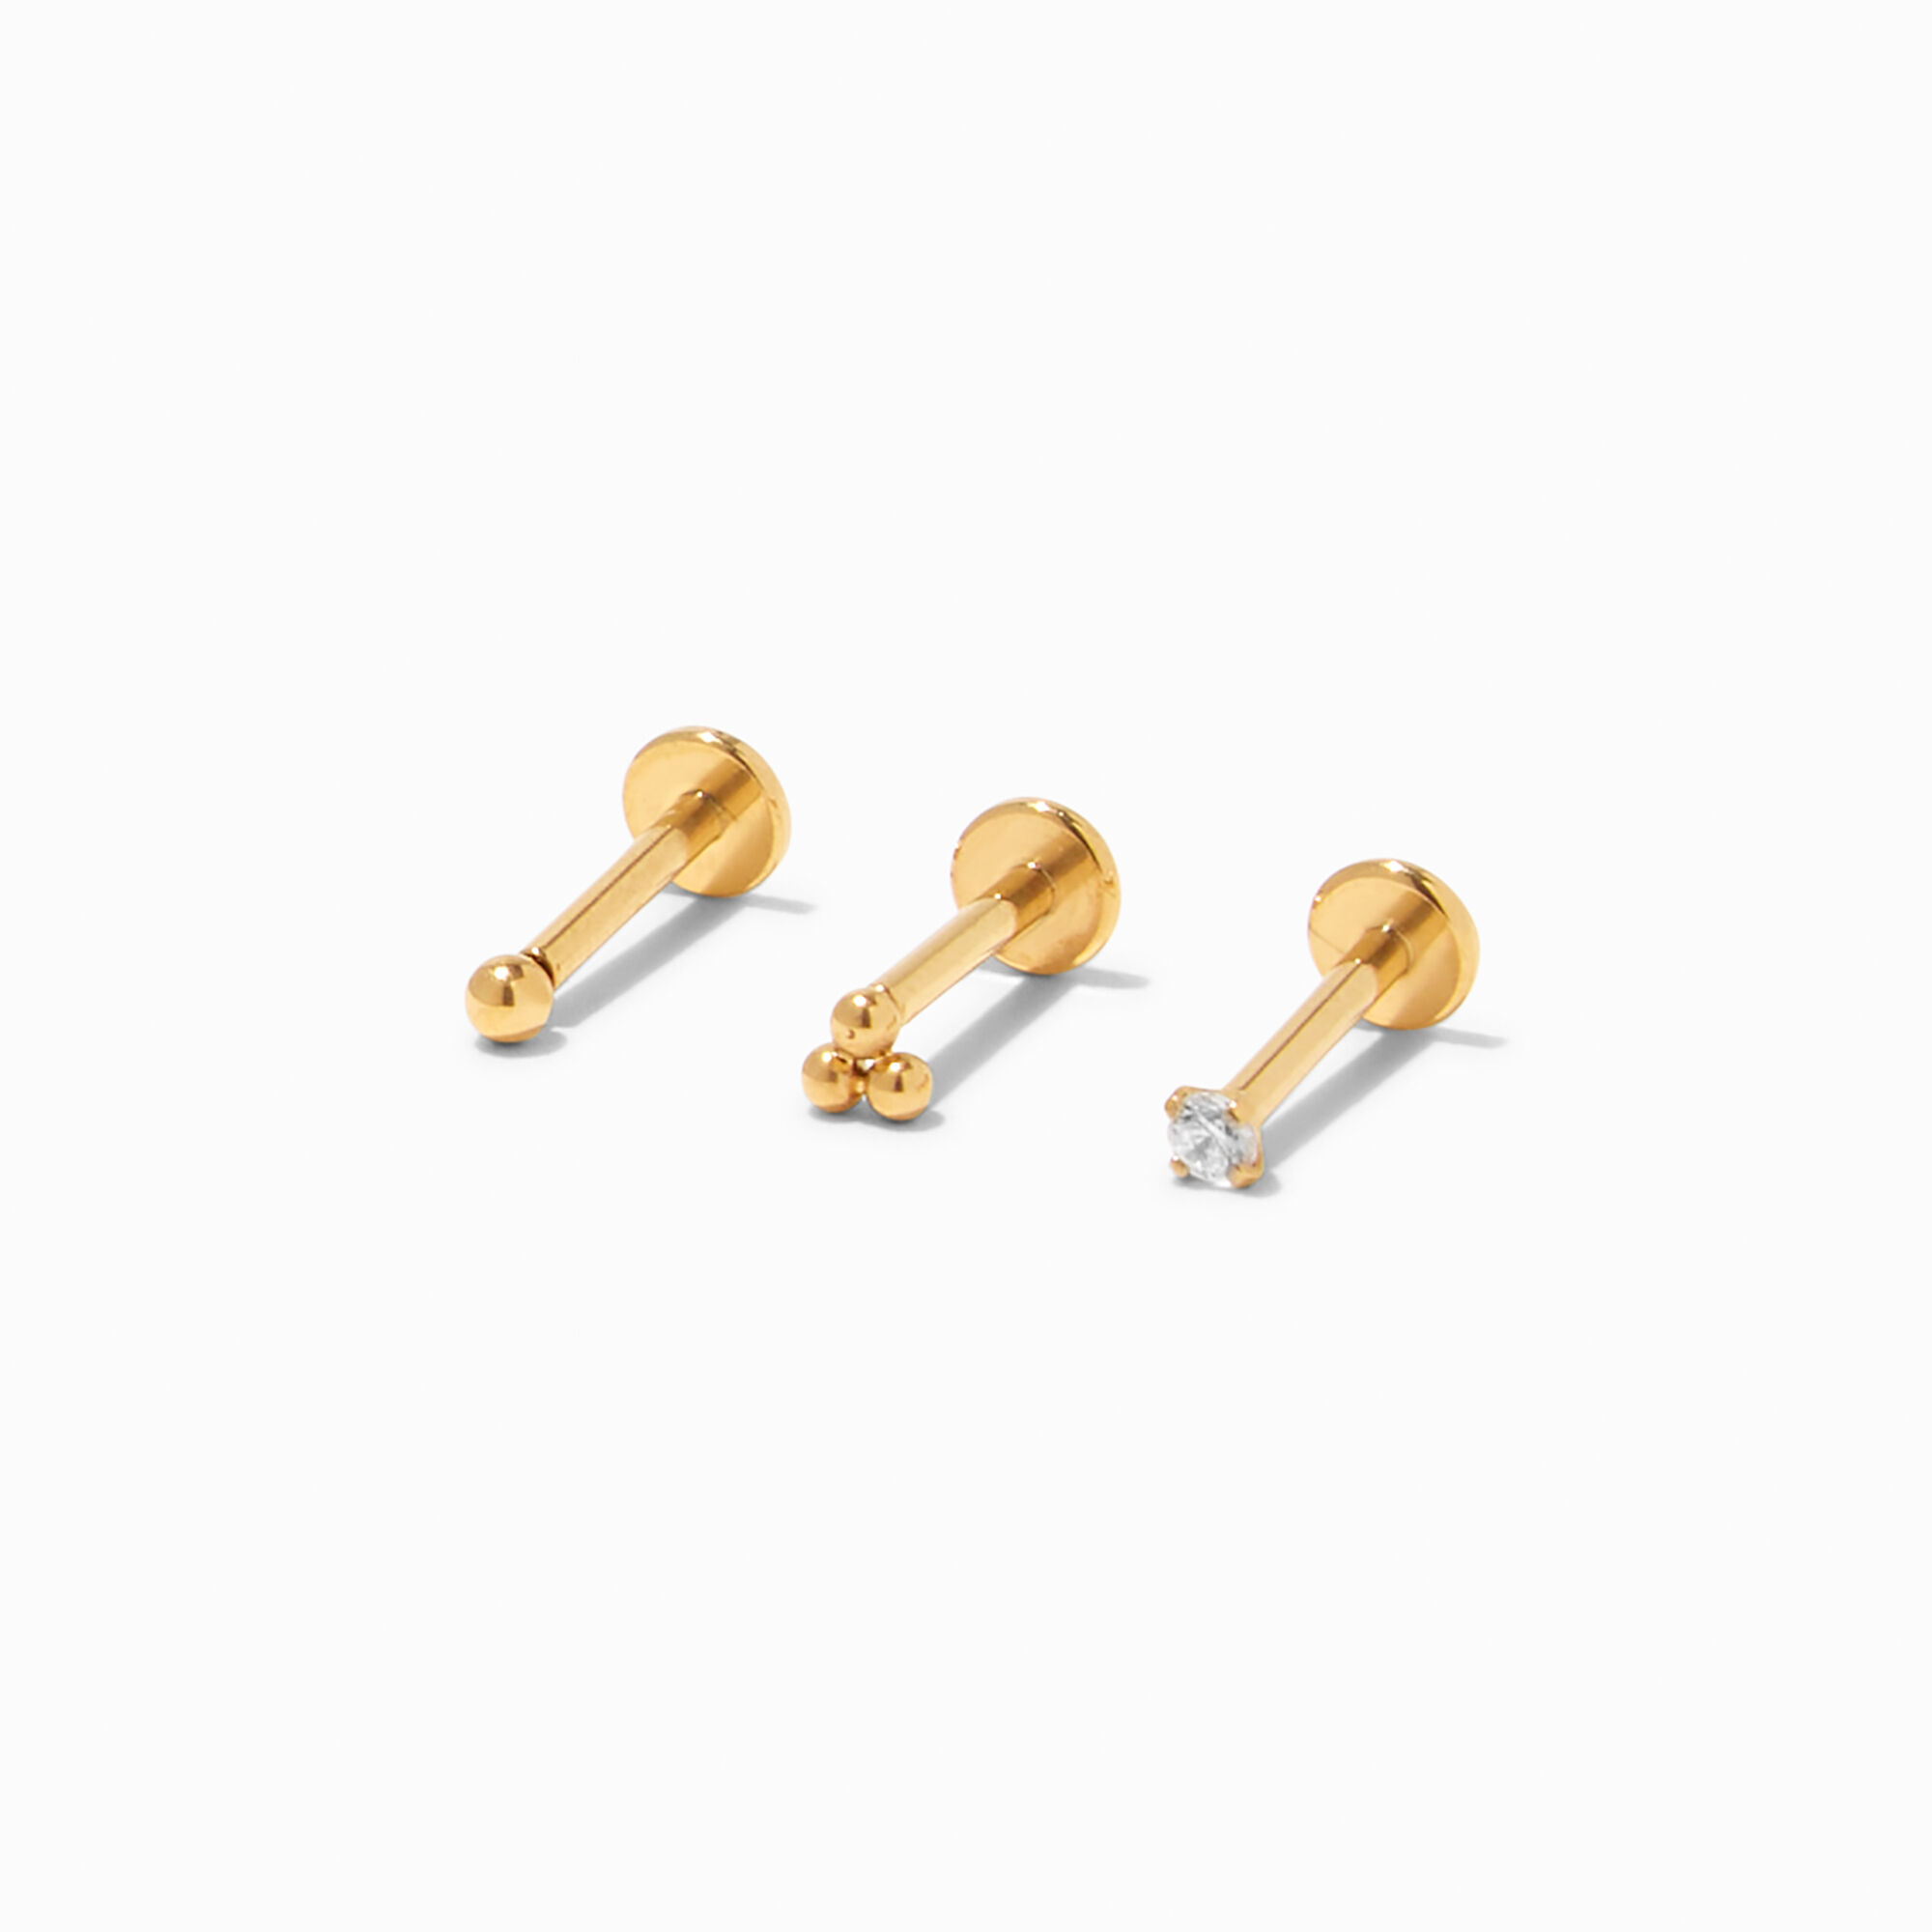 View Claires Tone Cubic Zirconia 16G Tragus Flat Back Earrings 3 Pack Gold information